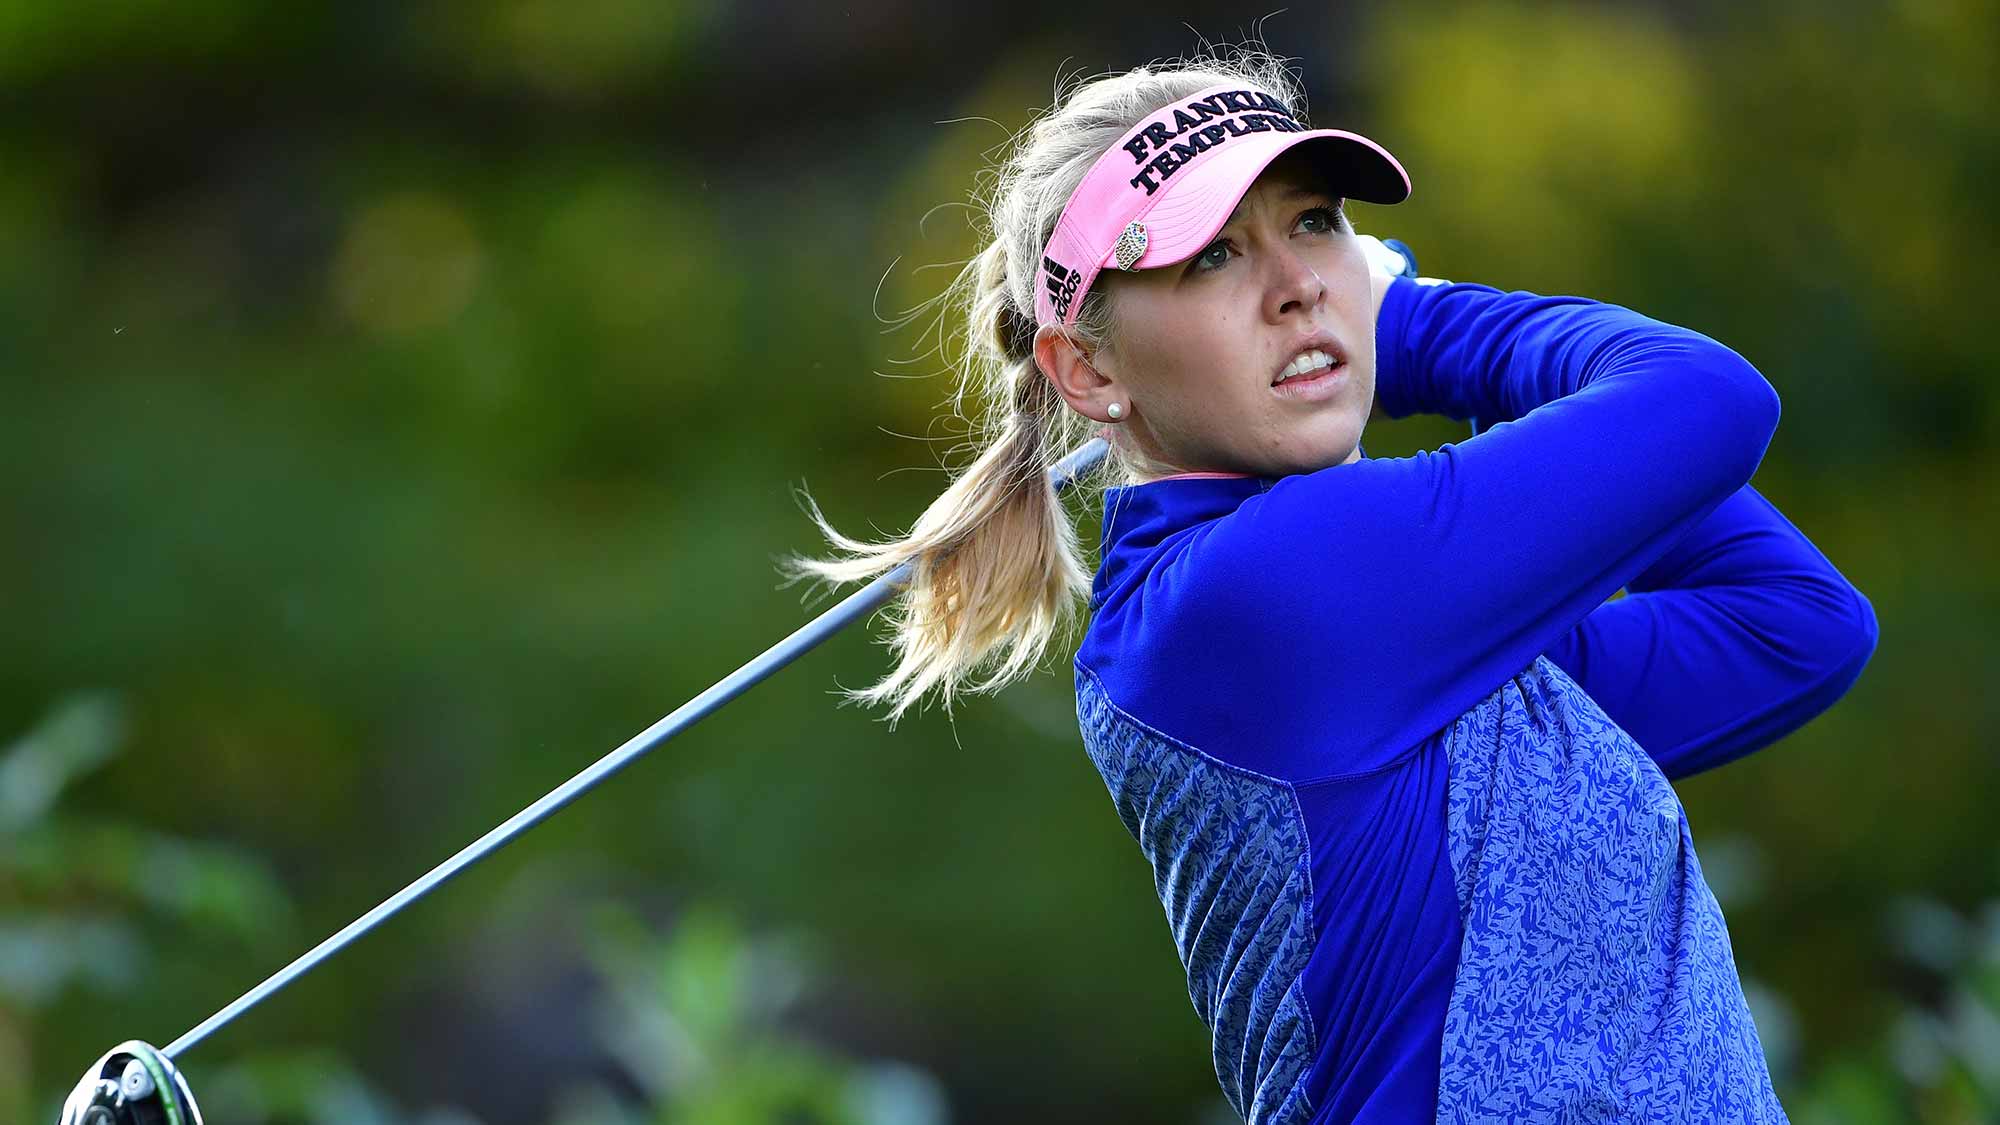  Jessica Korda of USA during the first round of the Evian Championship at The Evian Golf Club in Evian-les-Bains, France